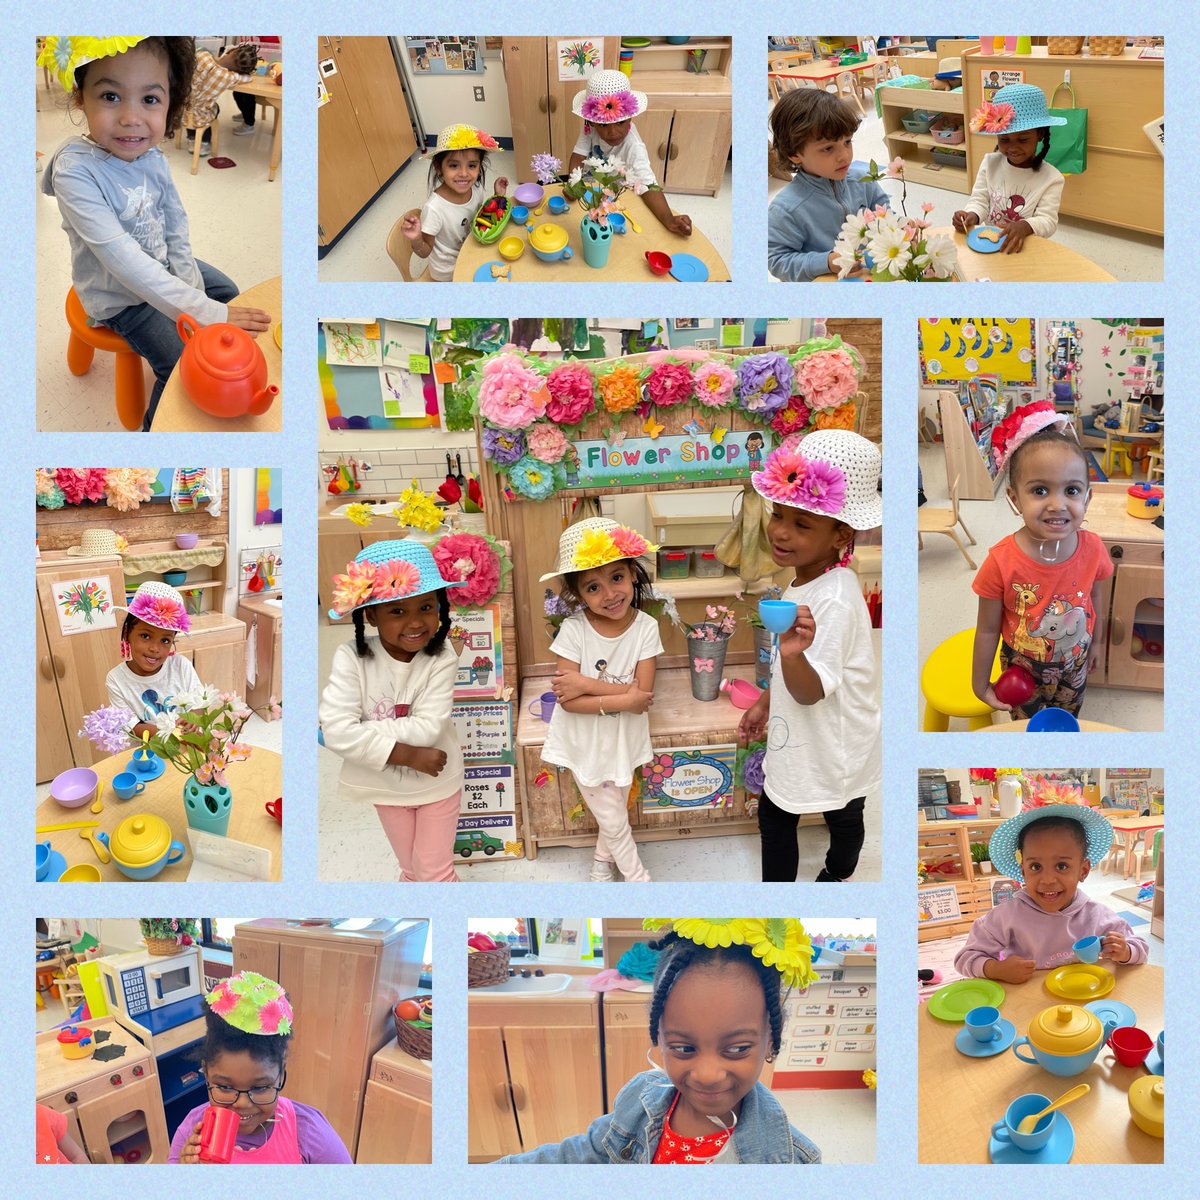 Tea Time at 2040 Forest Ave. Our students engaged in a real tea party in honor of #MSK. @DrMarionWilson @EdeleWilliams @shah_reen1007 @CChavezD31 @CSD31SI @D31DSPalton @DOEChancellor